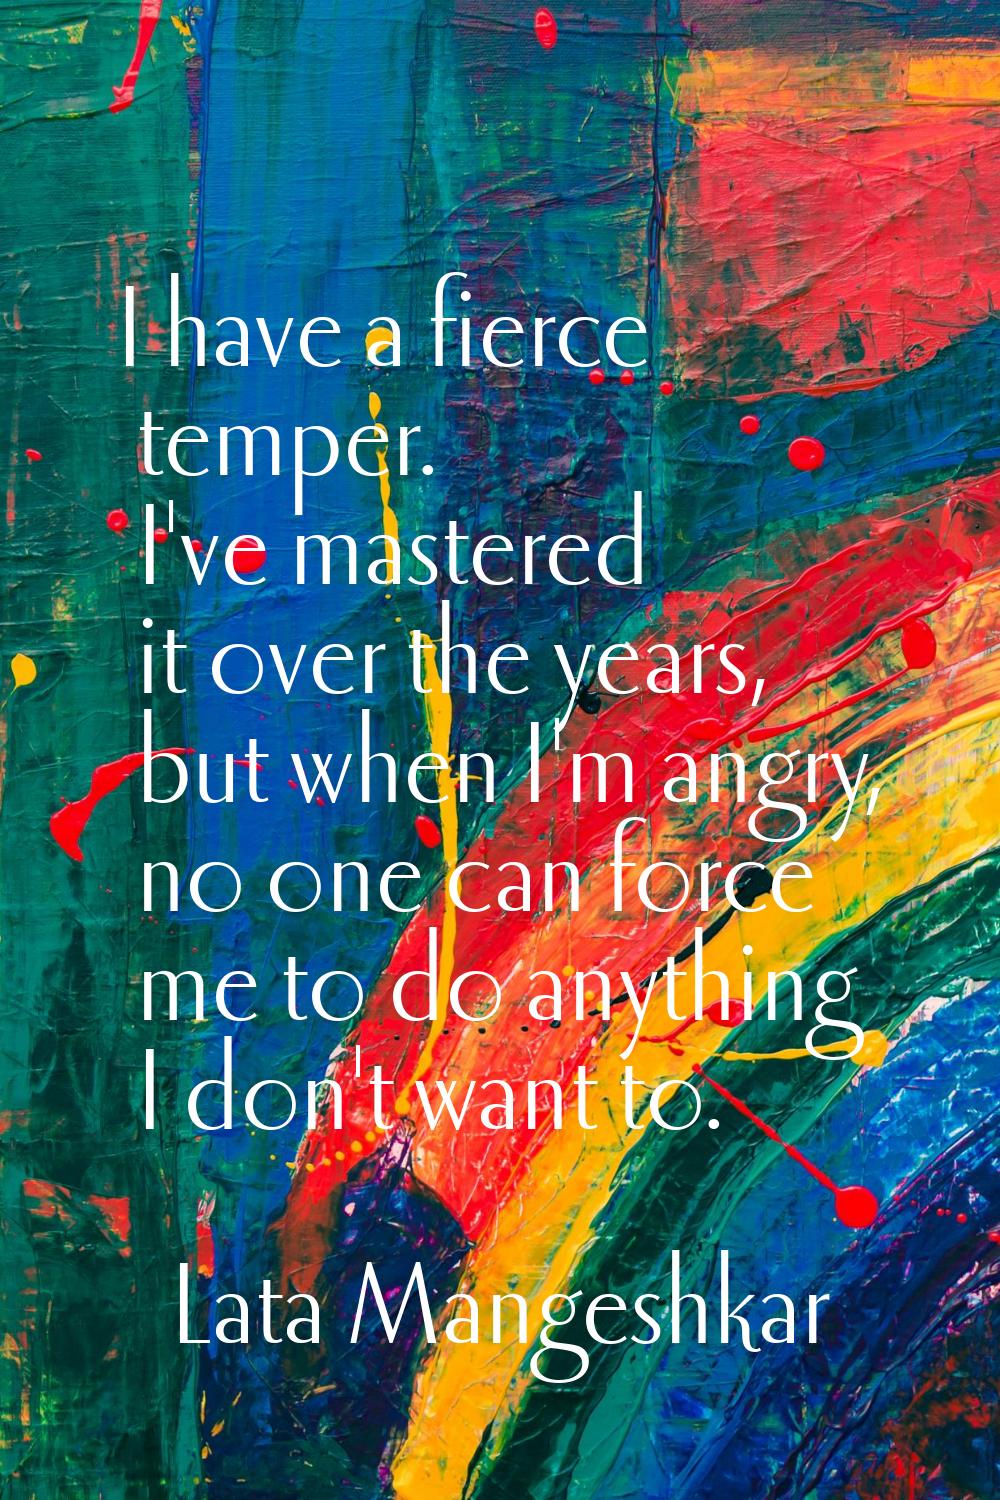 I have a fierce temper. I've mastered it over the years, but when I'm angry, no one can force me to